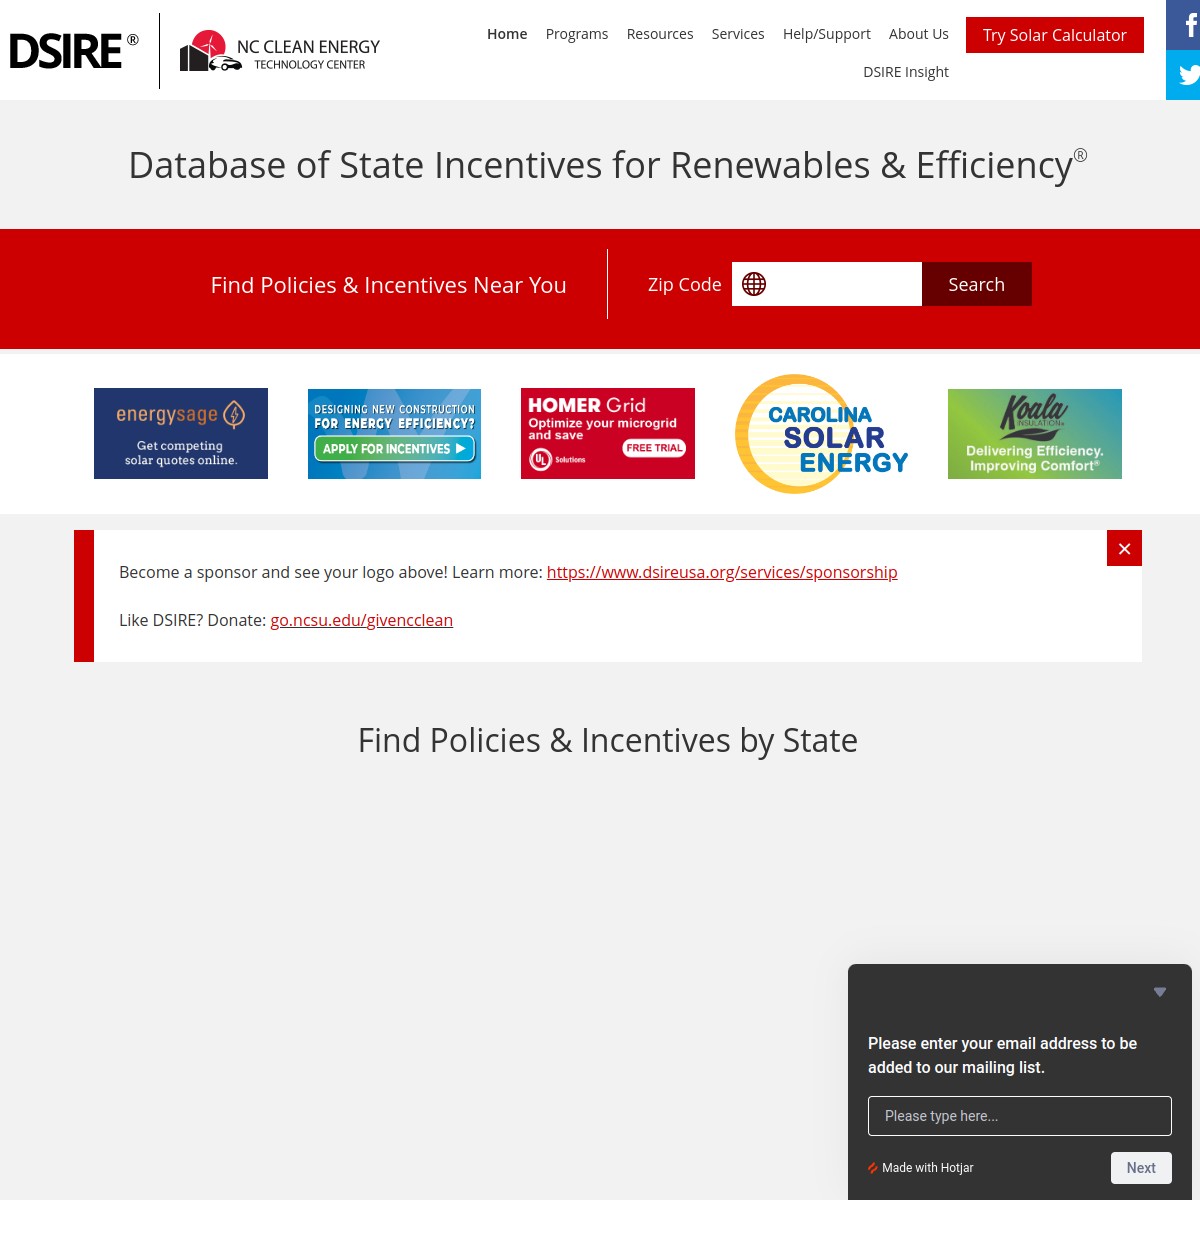 Database of State Incentives for Renewables & Efficiency